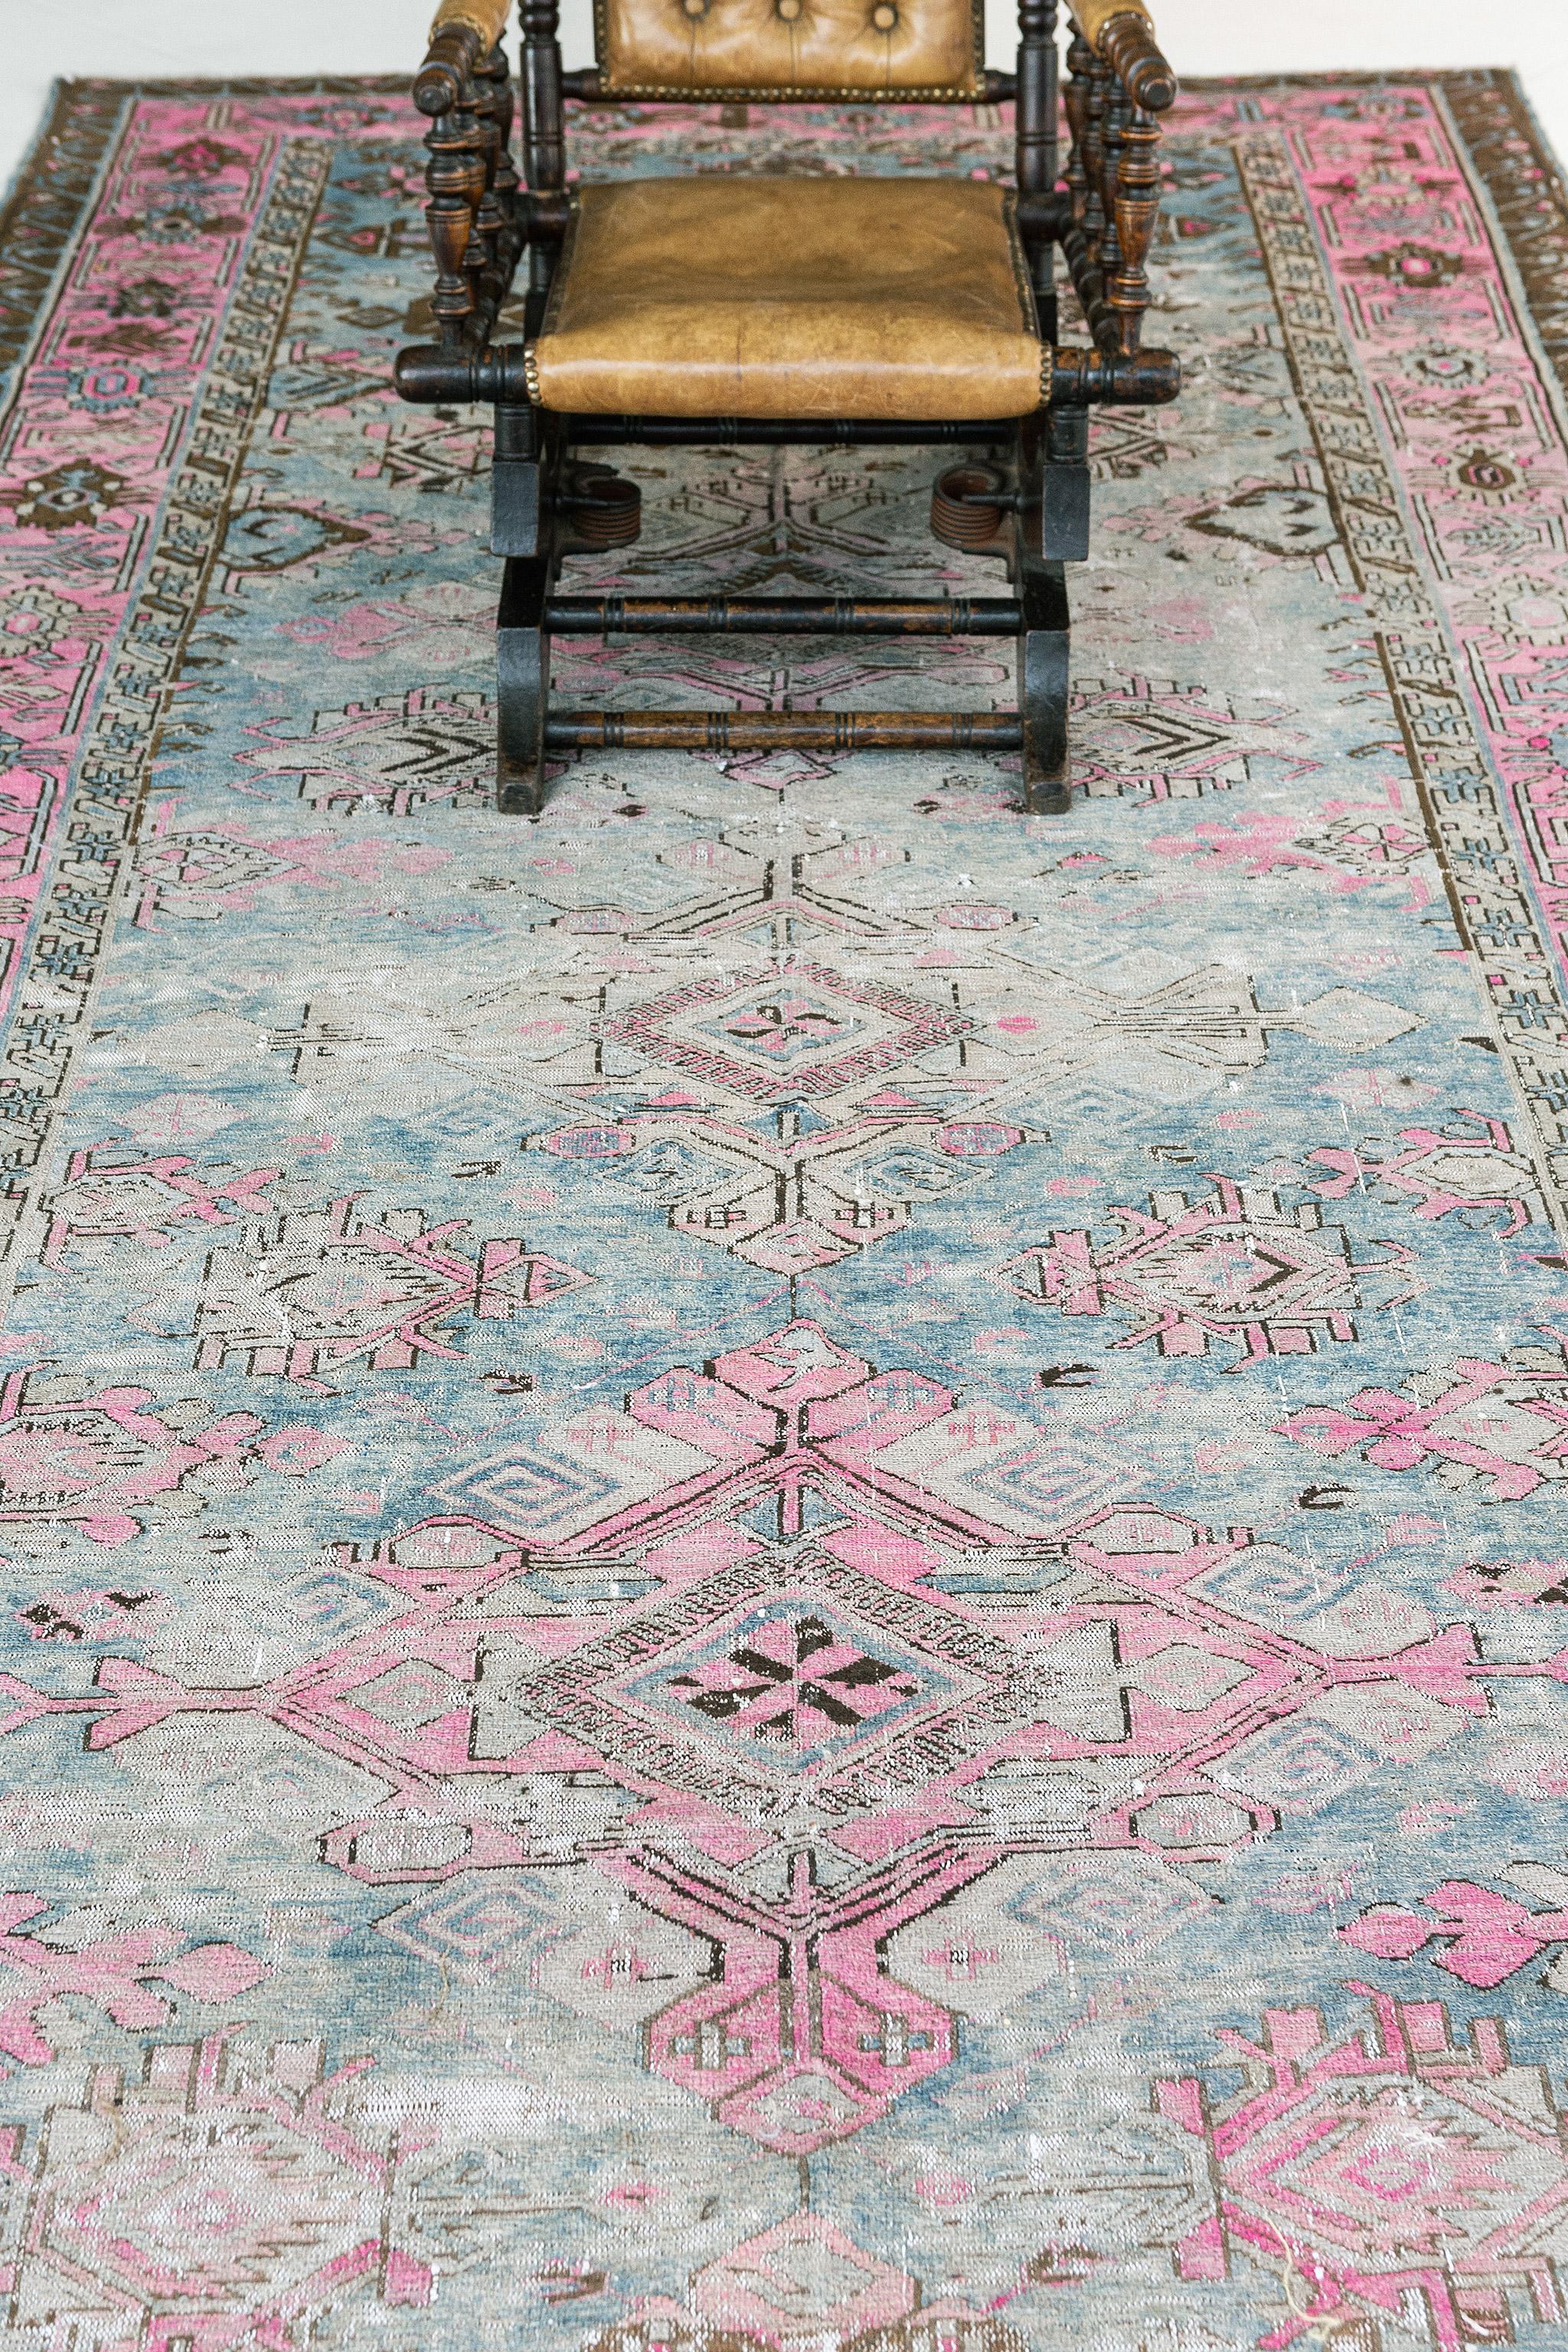 No doubt about it, the lovely pink color in this rug makes it an absolute stand-out. The magnificent color scheme from pink to blues makes it a magnificent addition to your room. The spectacular pink border with tribal designs is a beauty.